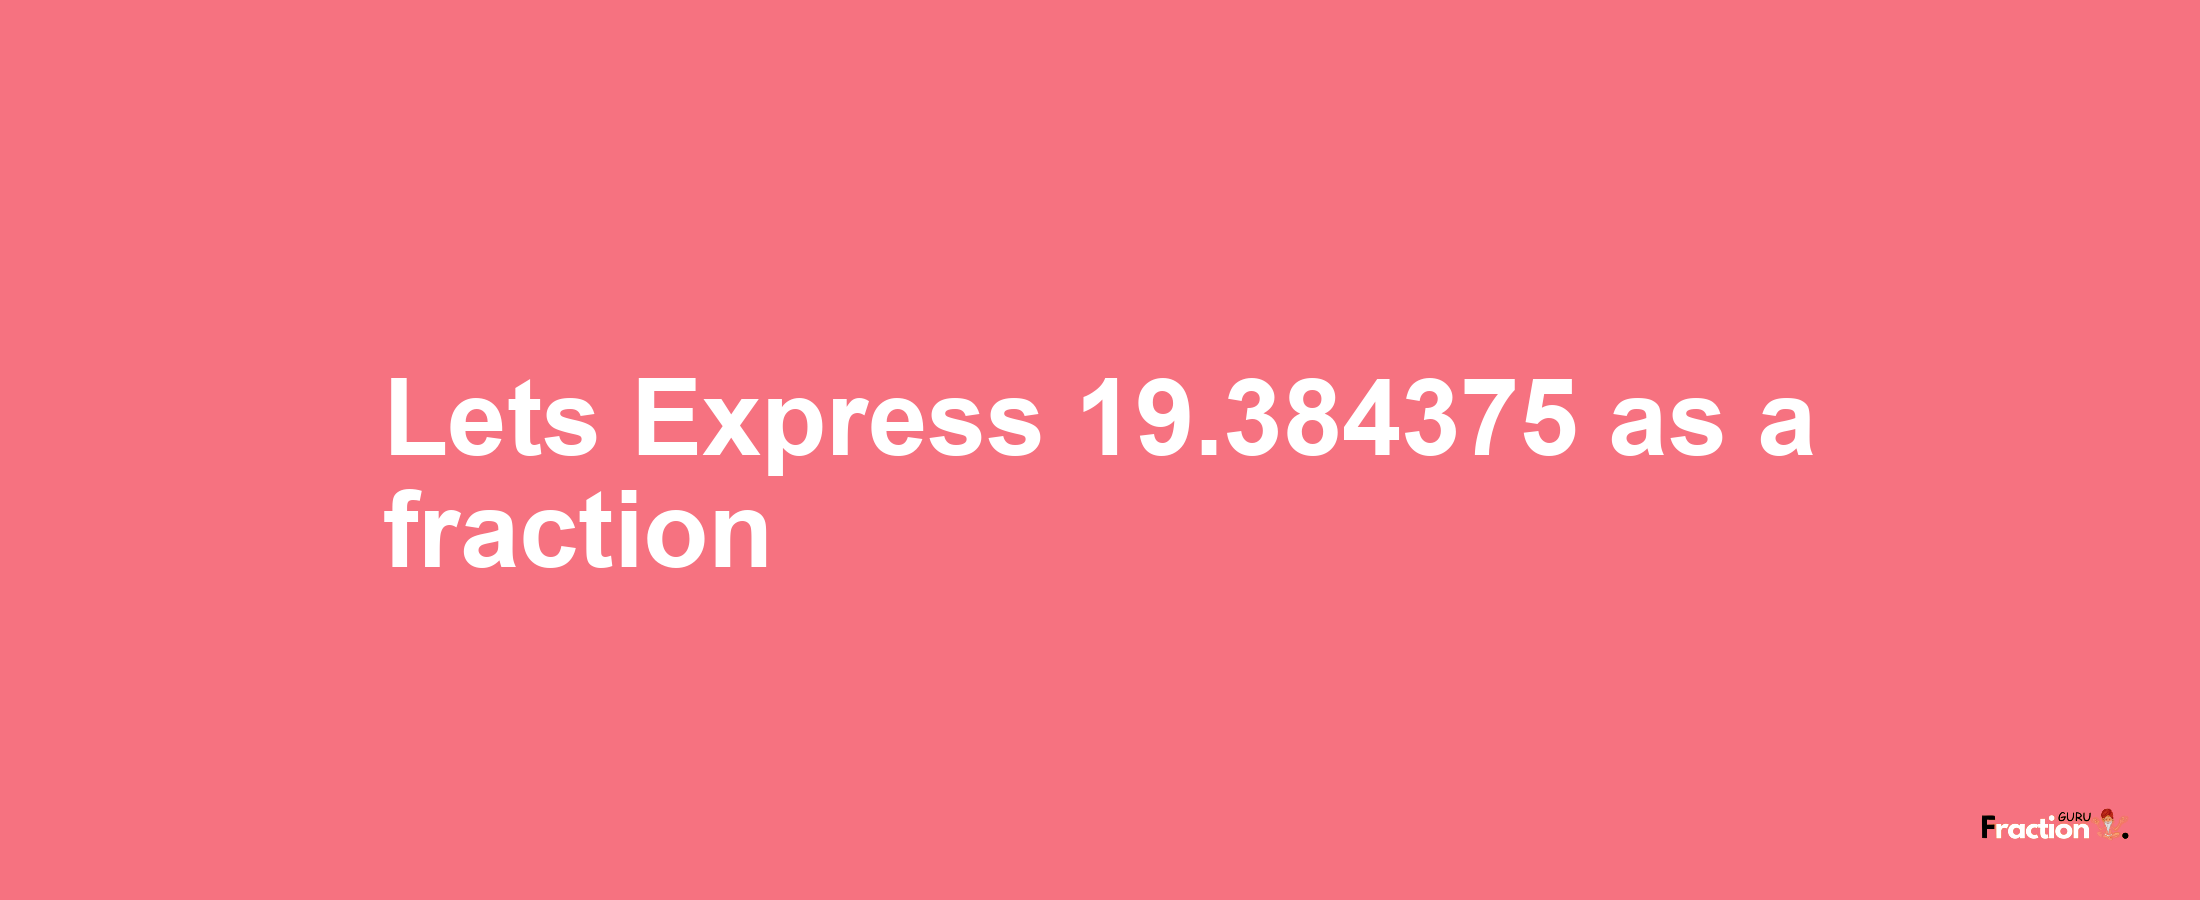 Lets Express 19.384375 as afraction